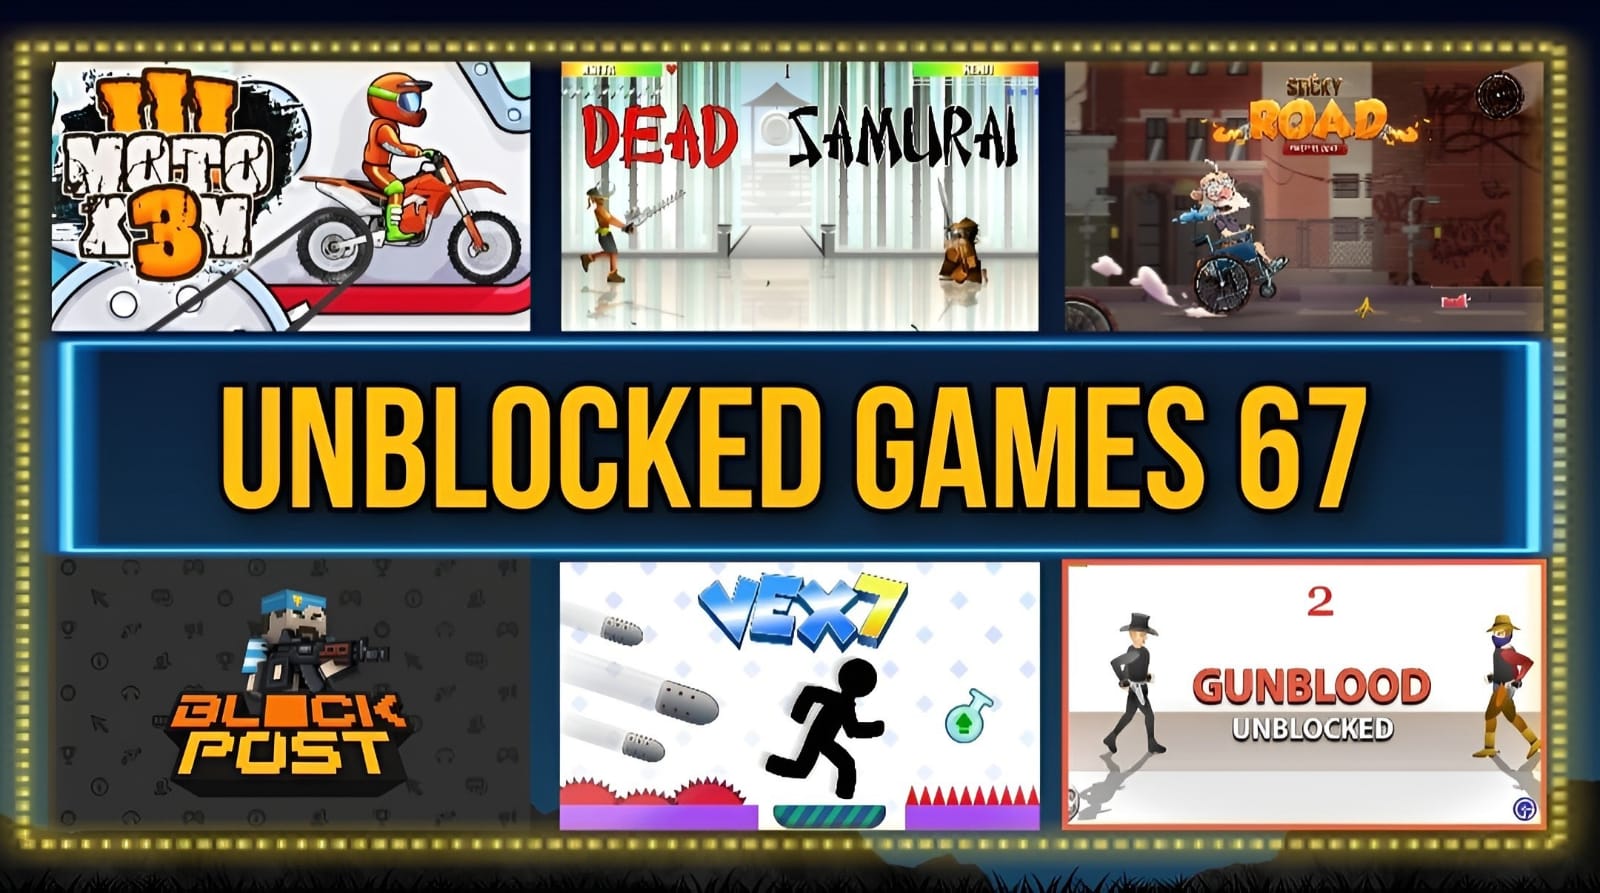 How to Play Unblocked Games Premium?